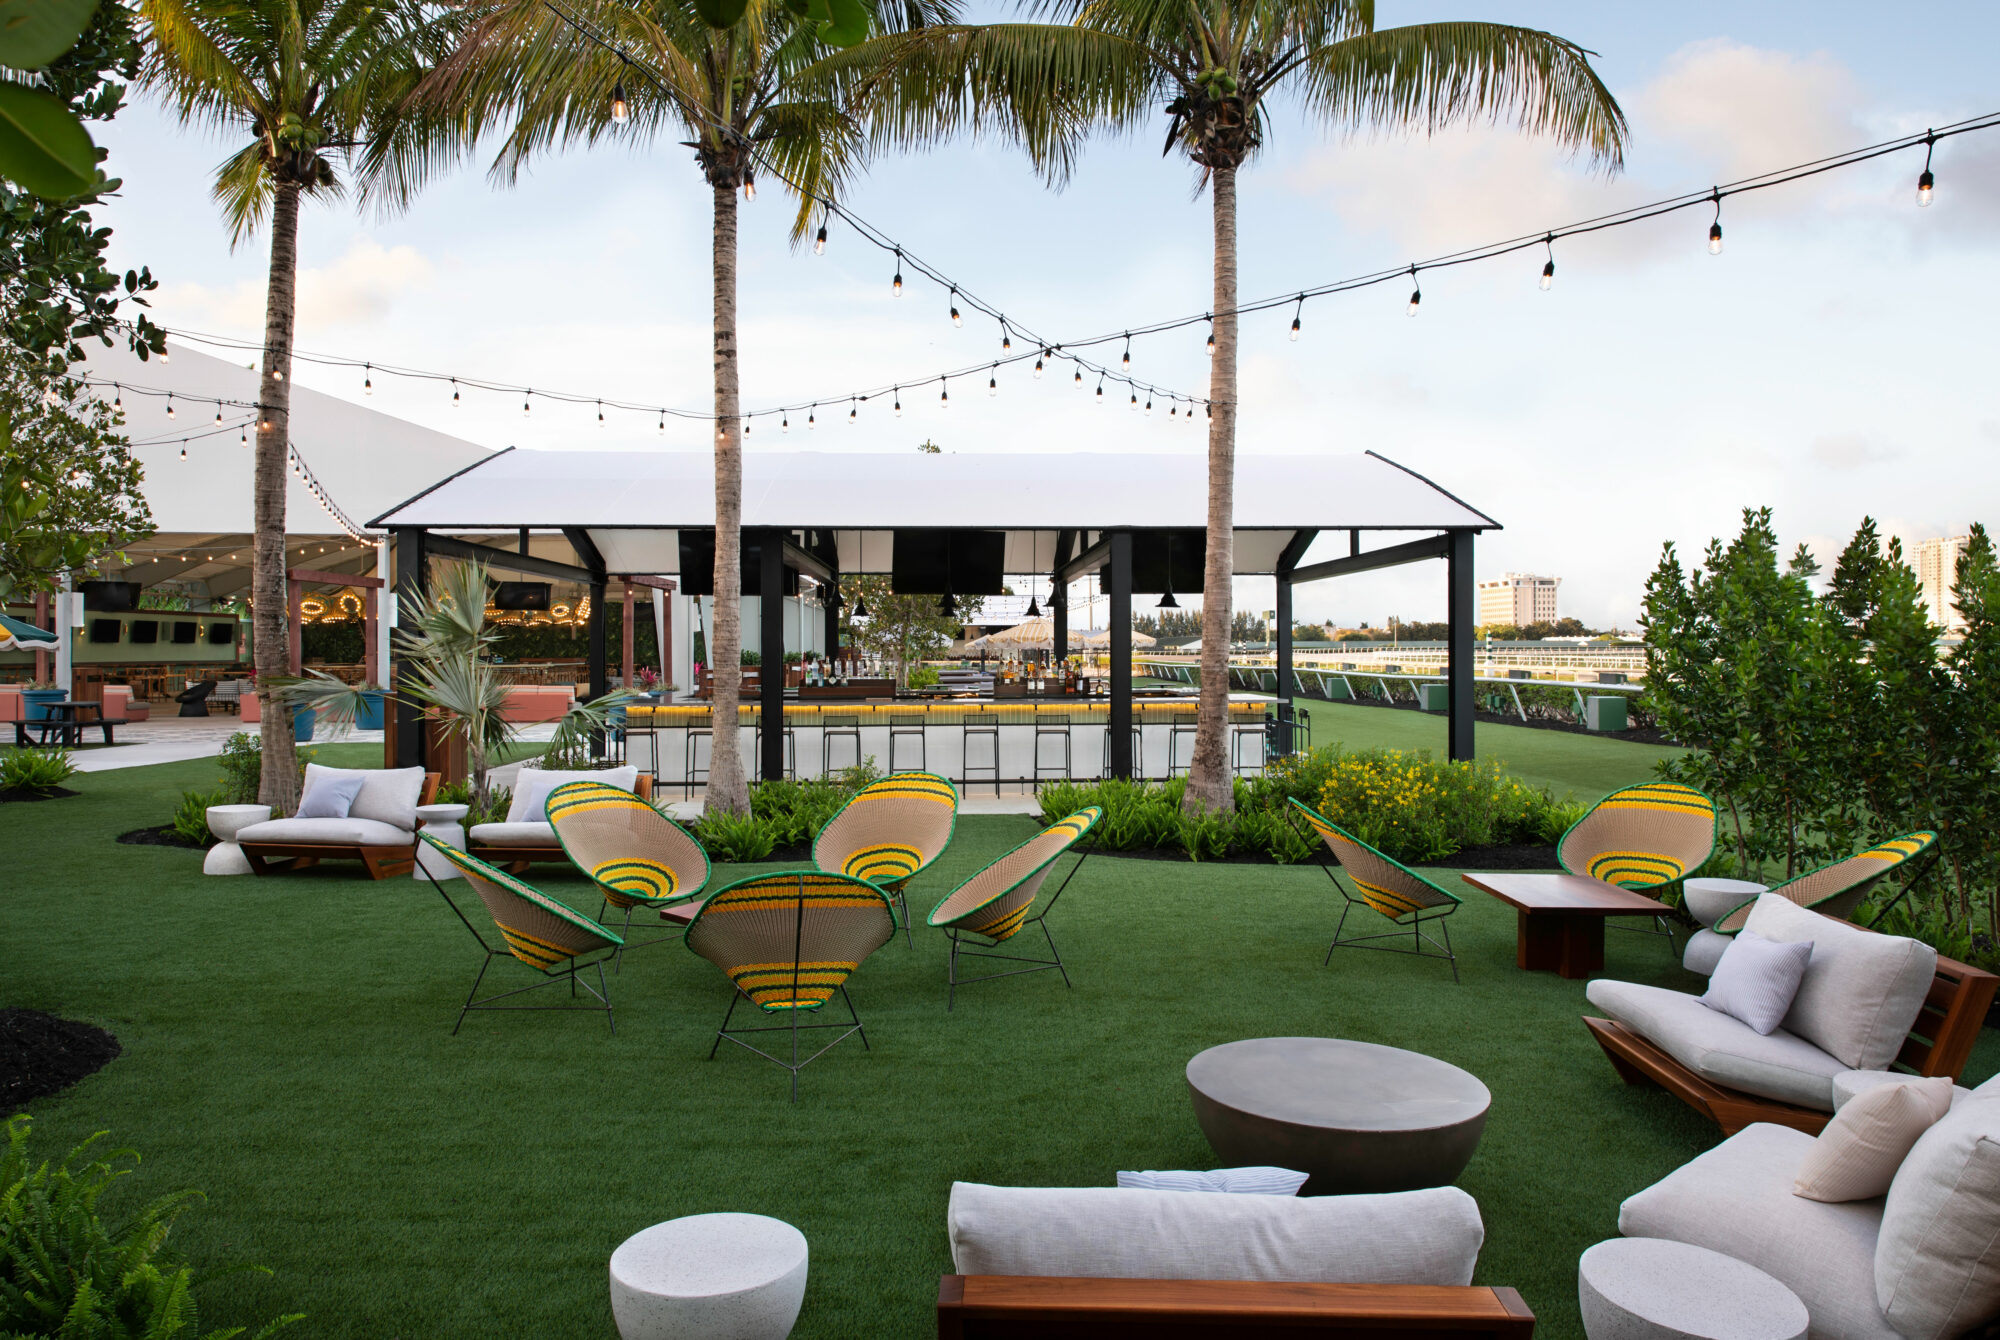 Carousel Club at Gulfstream Park outdoor seating